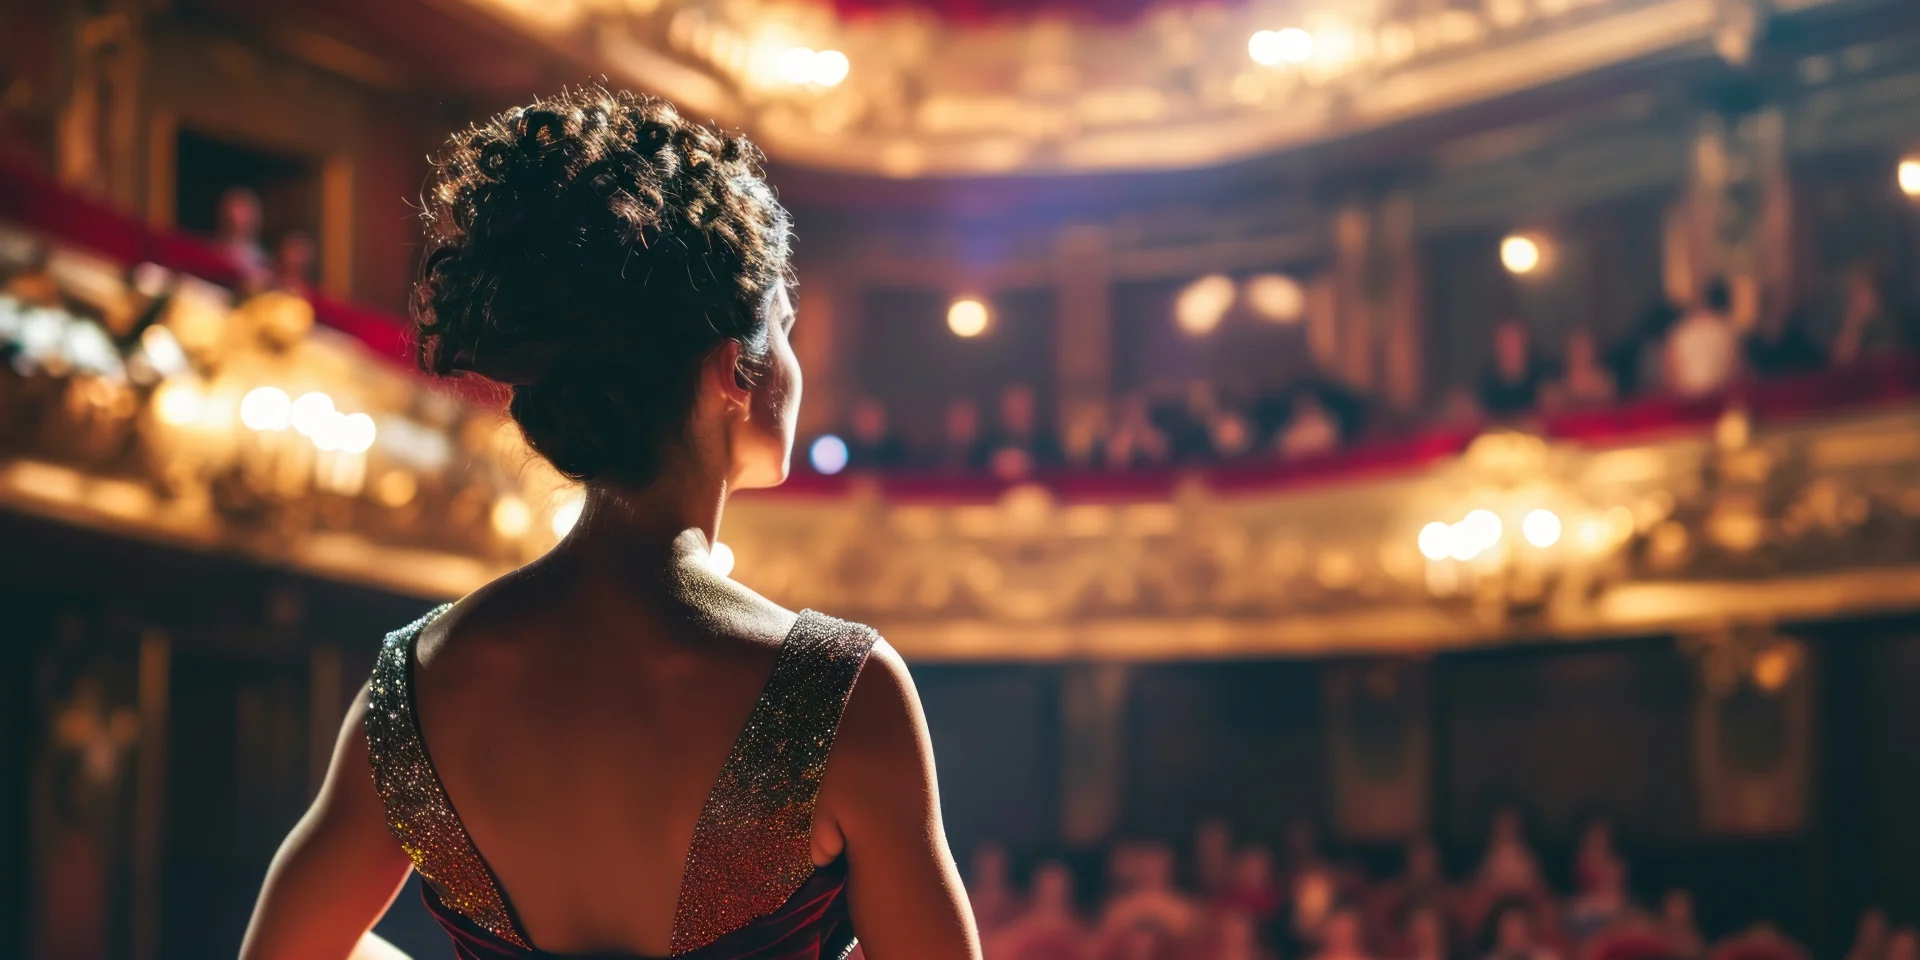 A close-up of a formally dressed performer on the grand stage of a prestigious theater. The performer is depicted from behind, gazing towards the audience, with the lights and spectators blurred in the background.